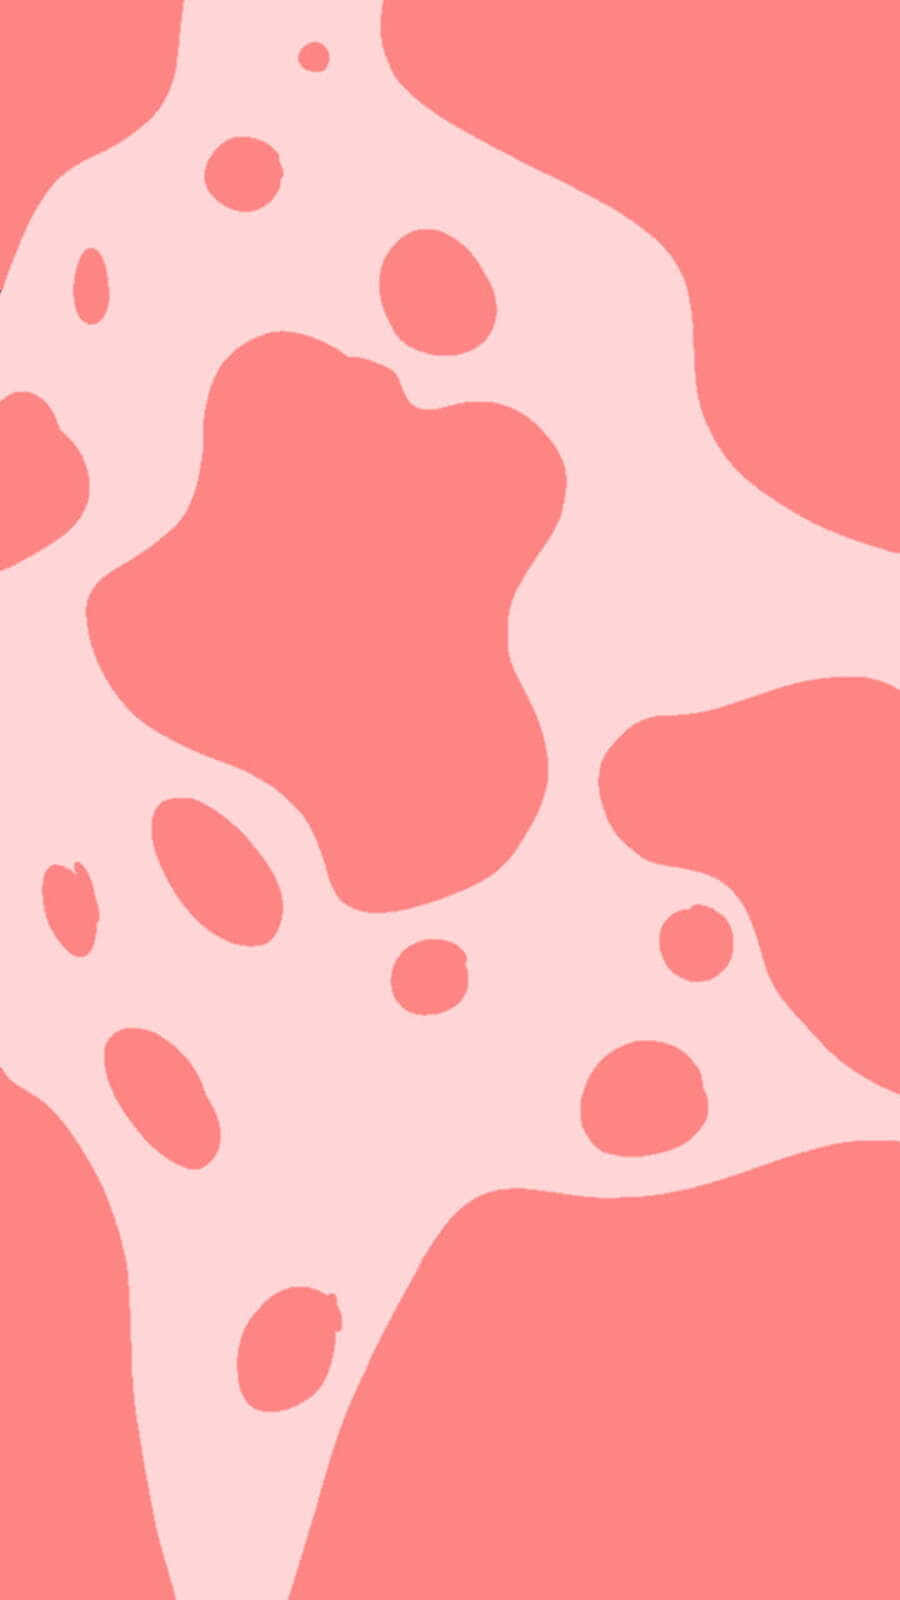 Adorable Kawaii Strawberry Cow soaking in the vibrant sunny fields Wallpaper